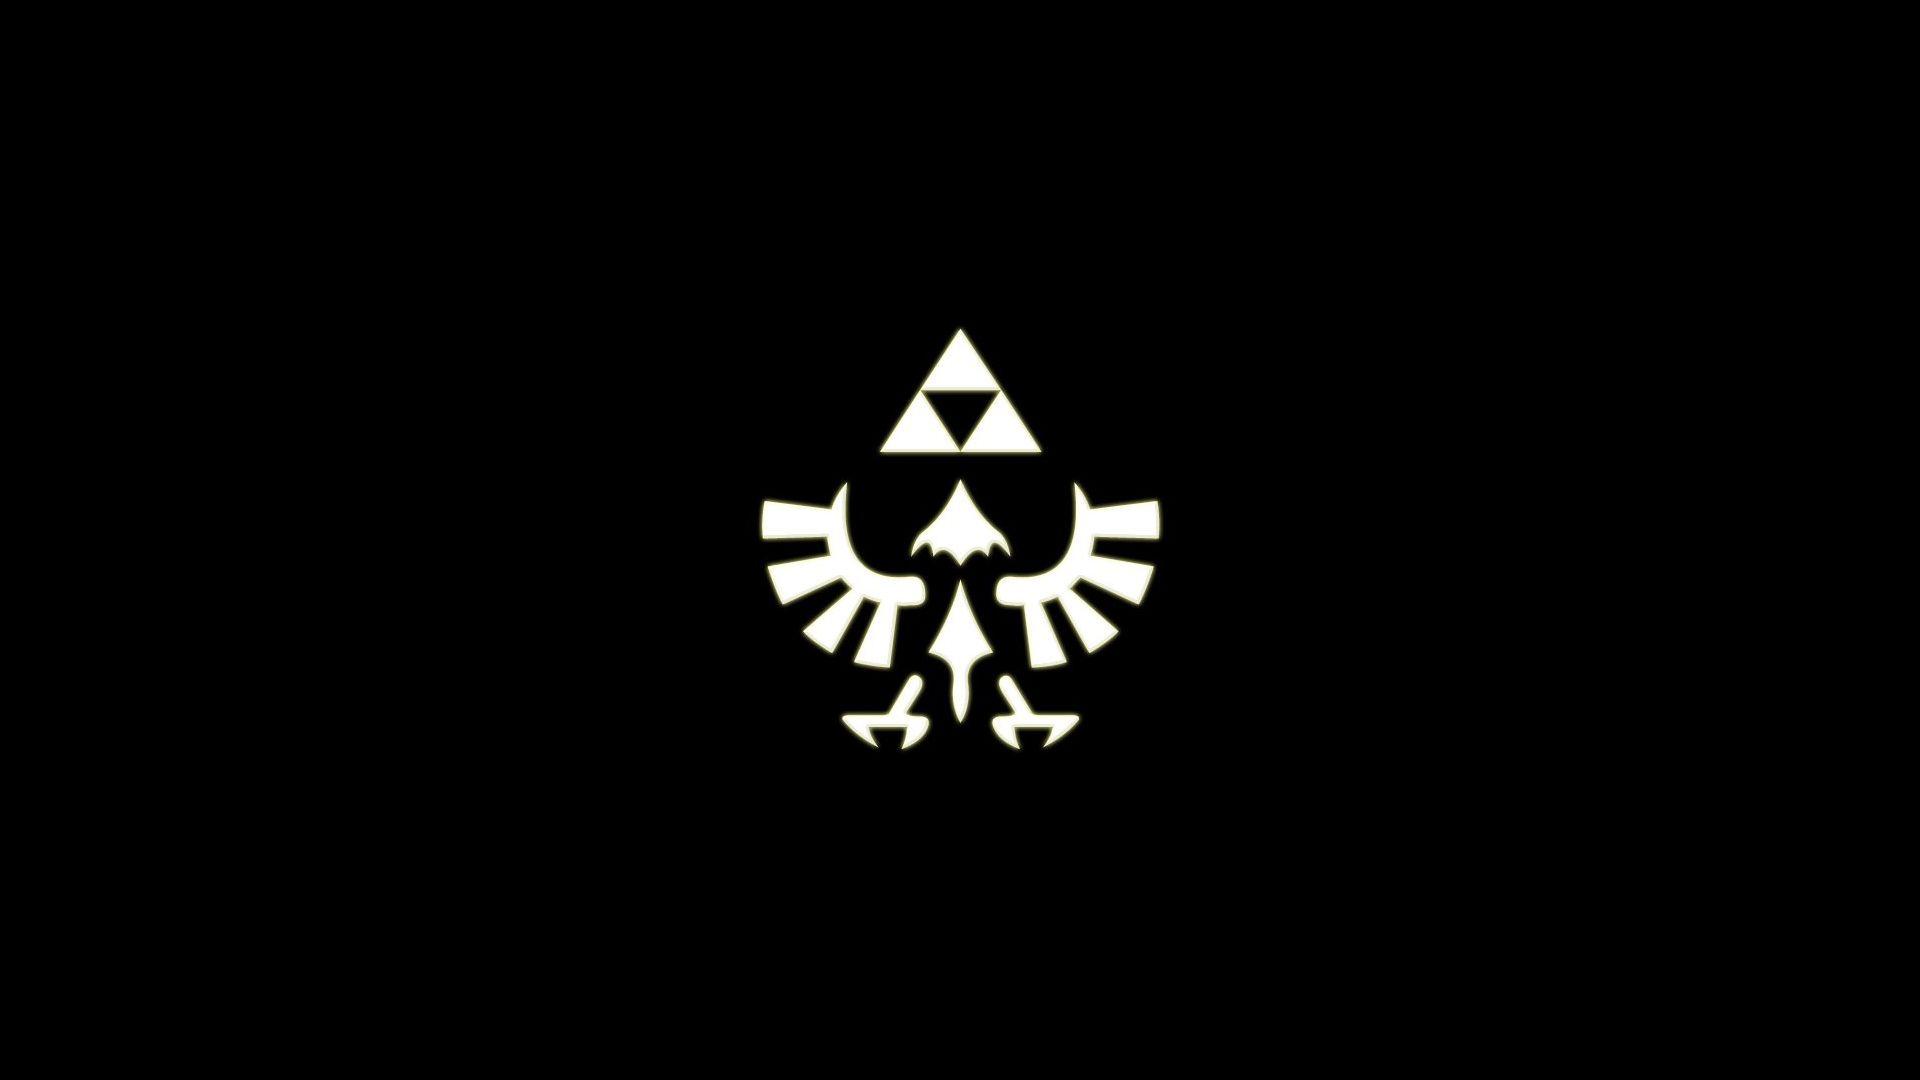 Download Triforce The Wallpaper 1920x1080